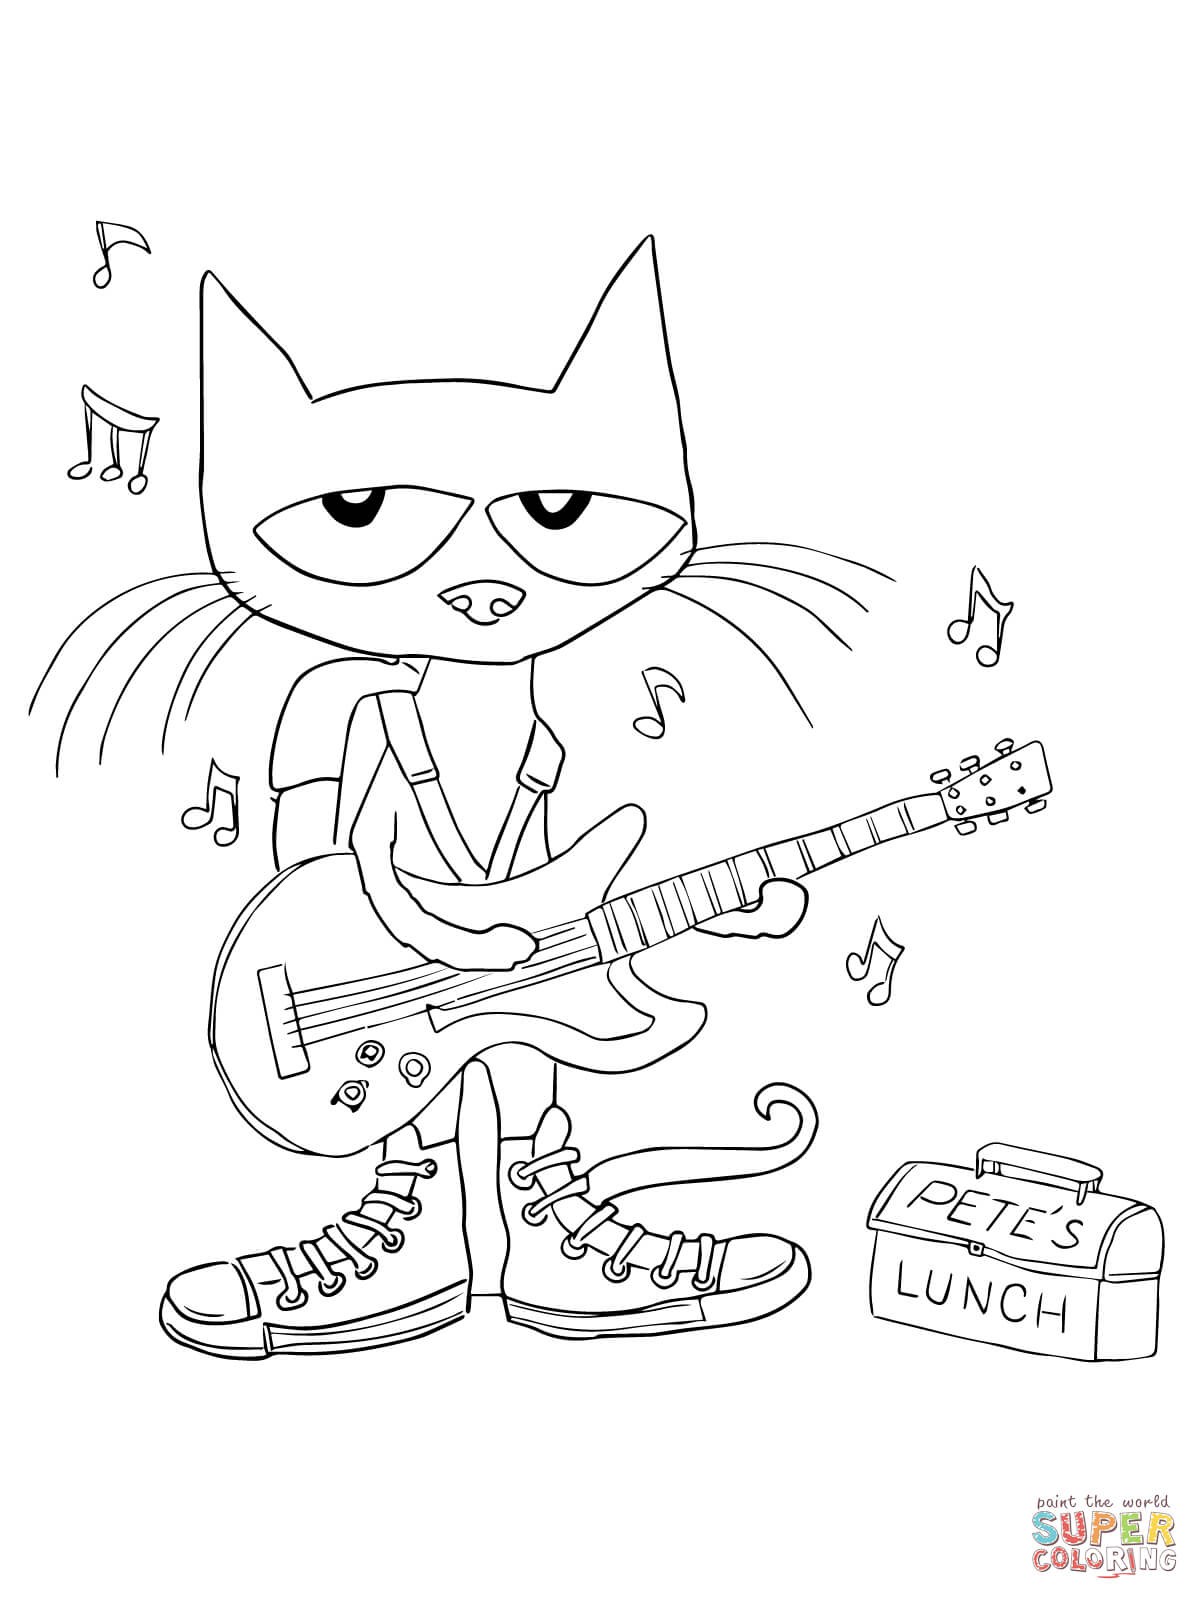 Pete the Cat Coloring Pages Wallpaper